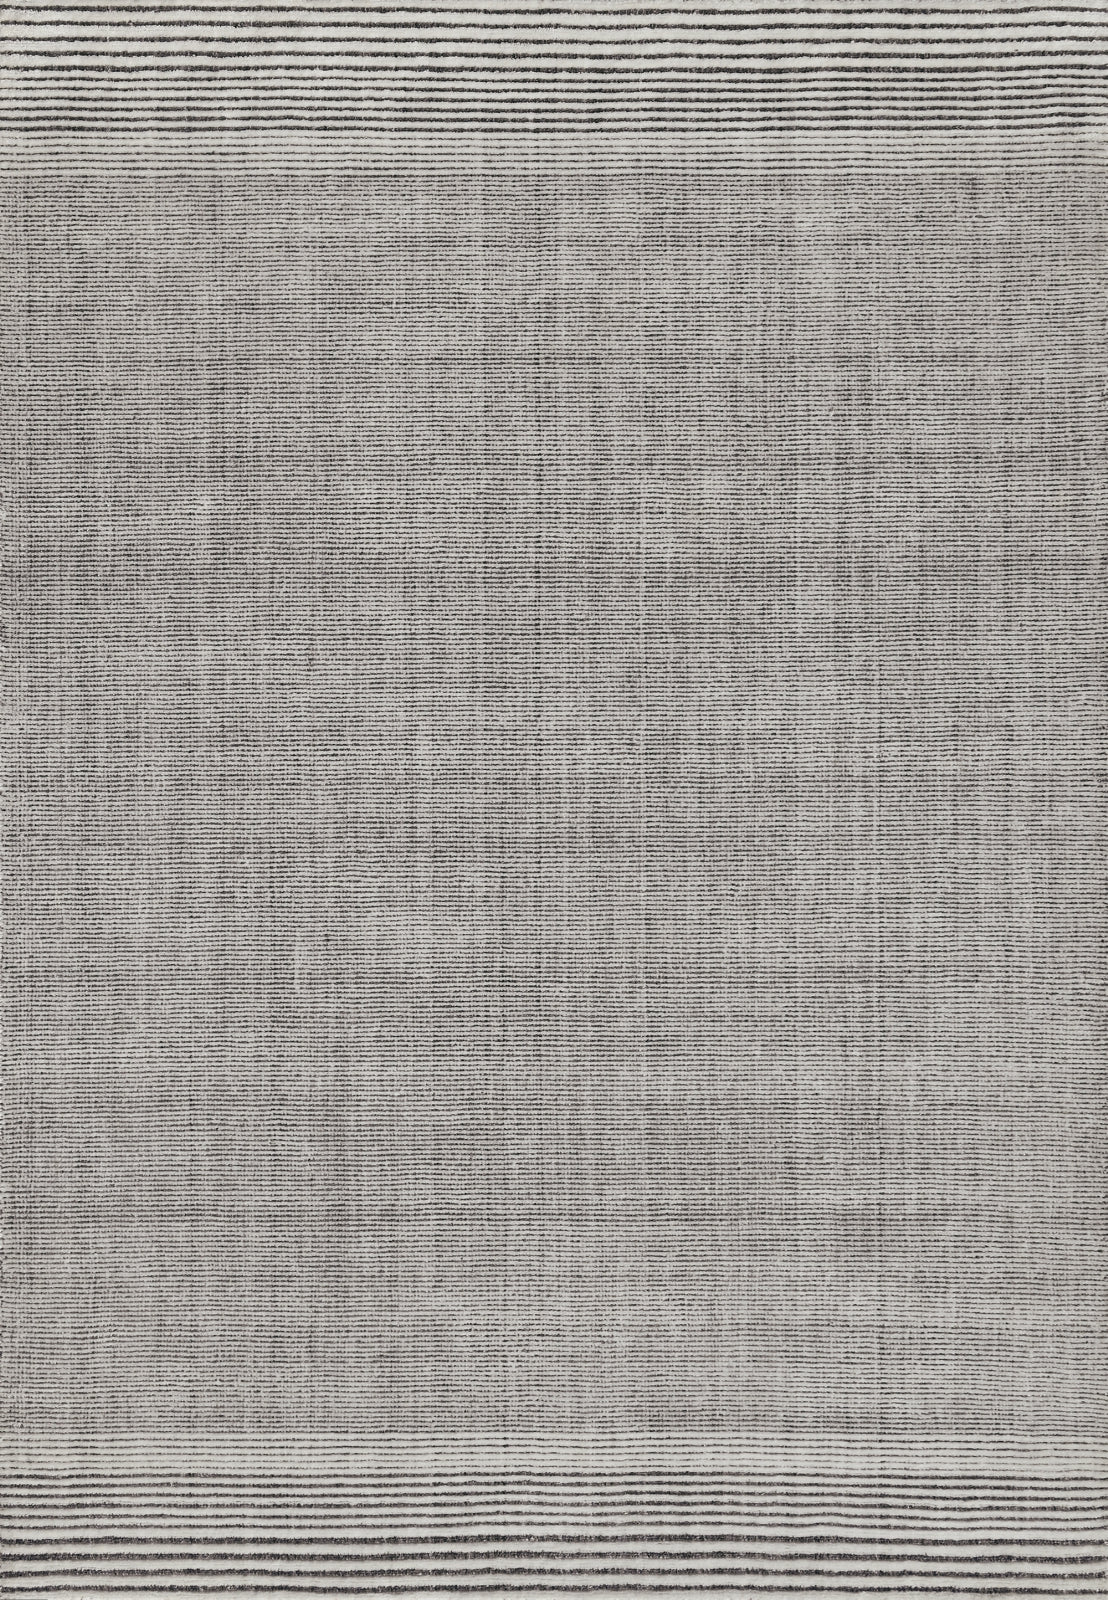 Dynamic Rugs Score 4150 Ivory/Charcoal Area Rug